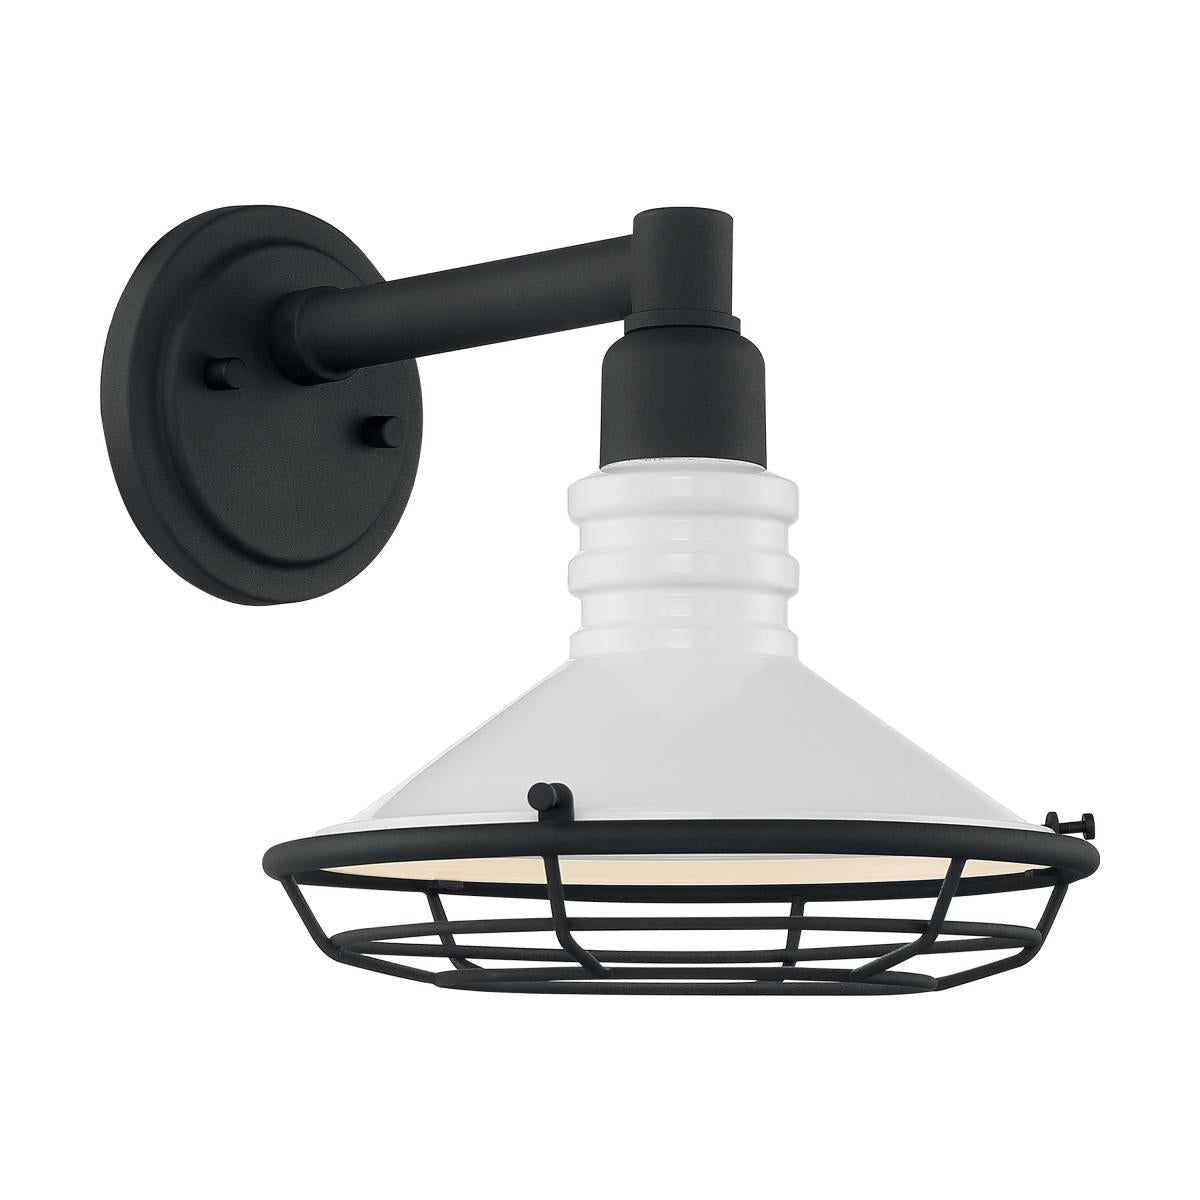 Blue Harbor - 1 Light Small Sconce with Gloss White - Textured Black Finish